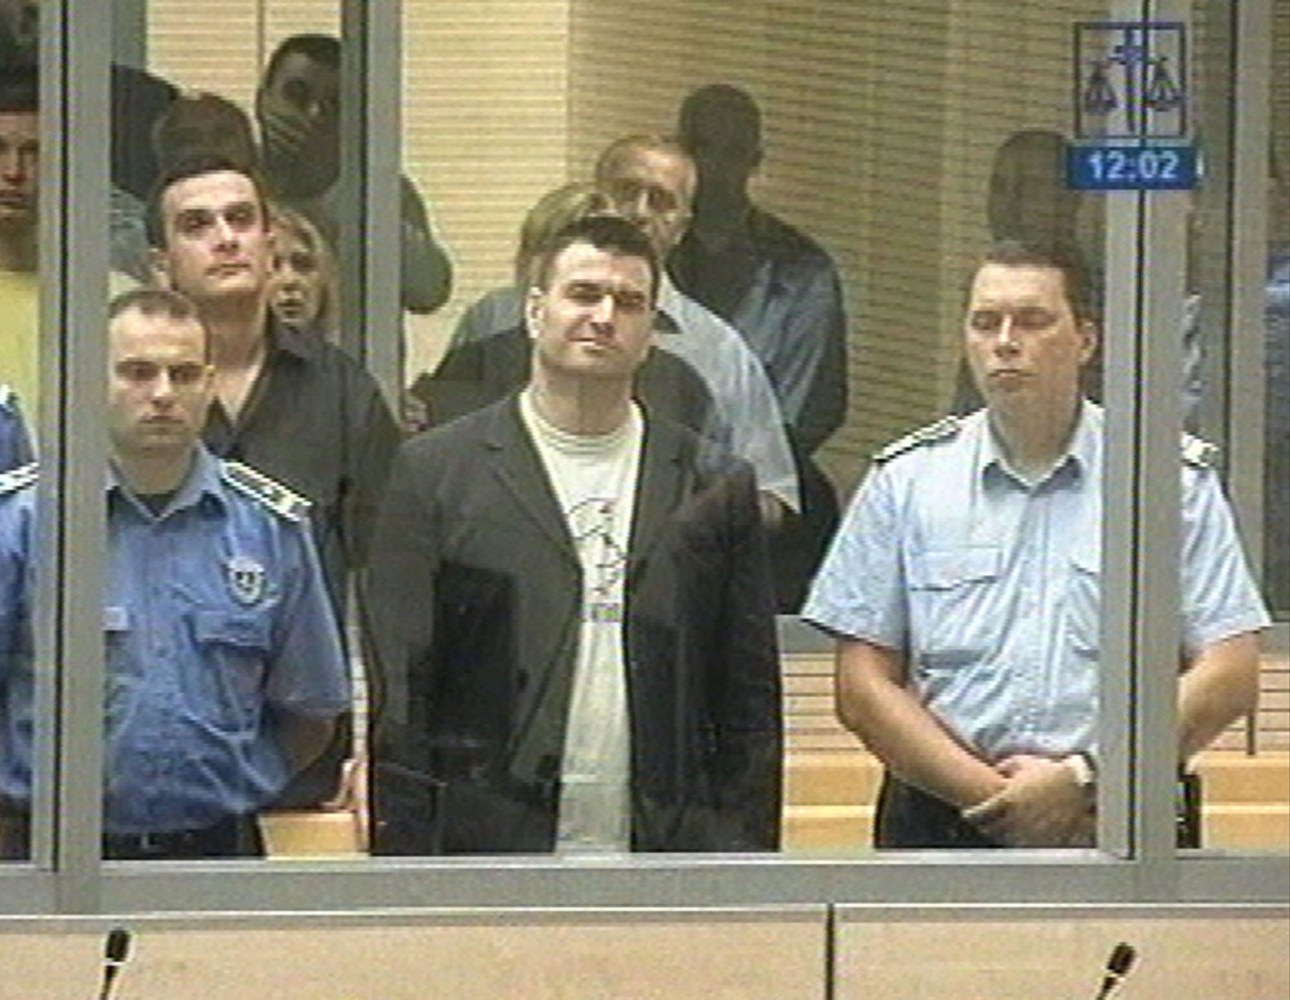 Milorad Ulemek is the latest proposed perpetrator. Now in jail in Serbia he was previously a part of a hit squad acting on the orders of the regime of Slobodan Milosevic